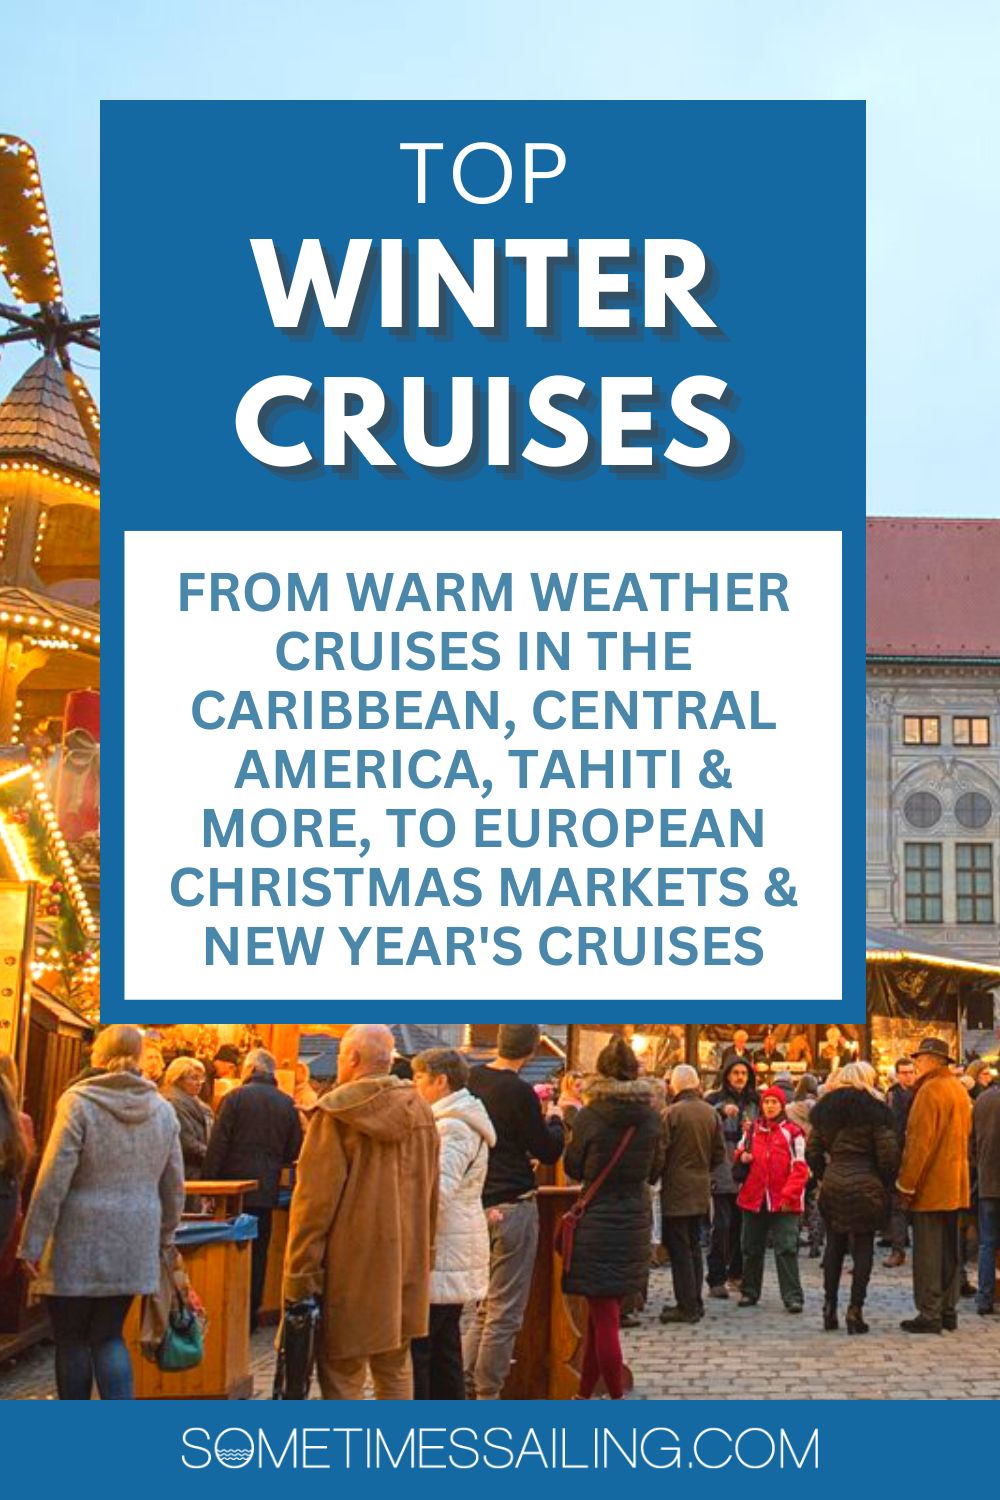 Top Winter Cruises: From warm weather cruises in the Caribbean...and a photo of the Christmas holiday market behind it.